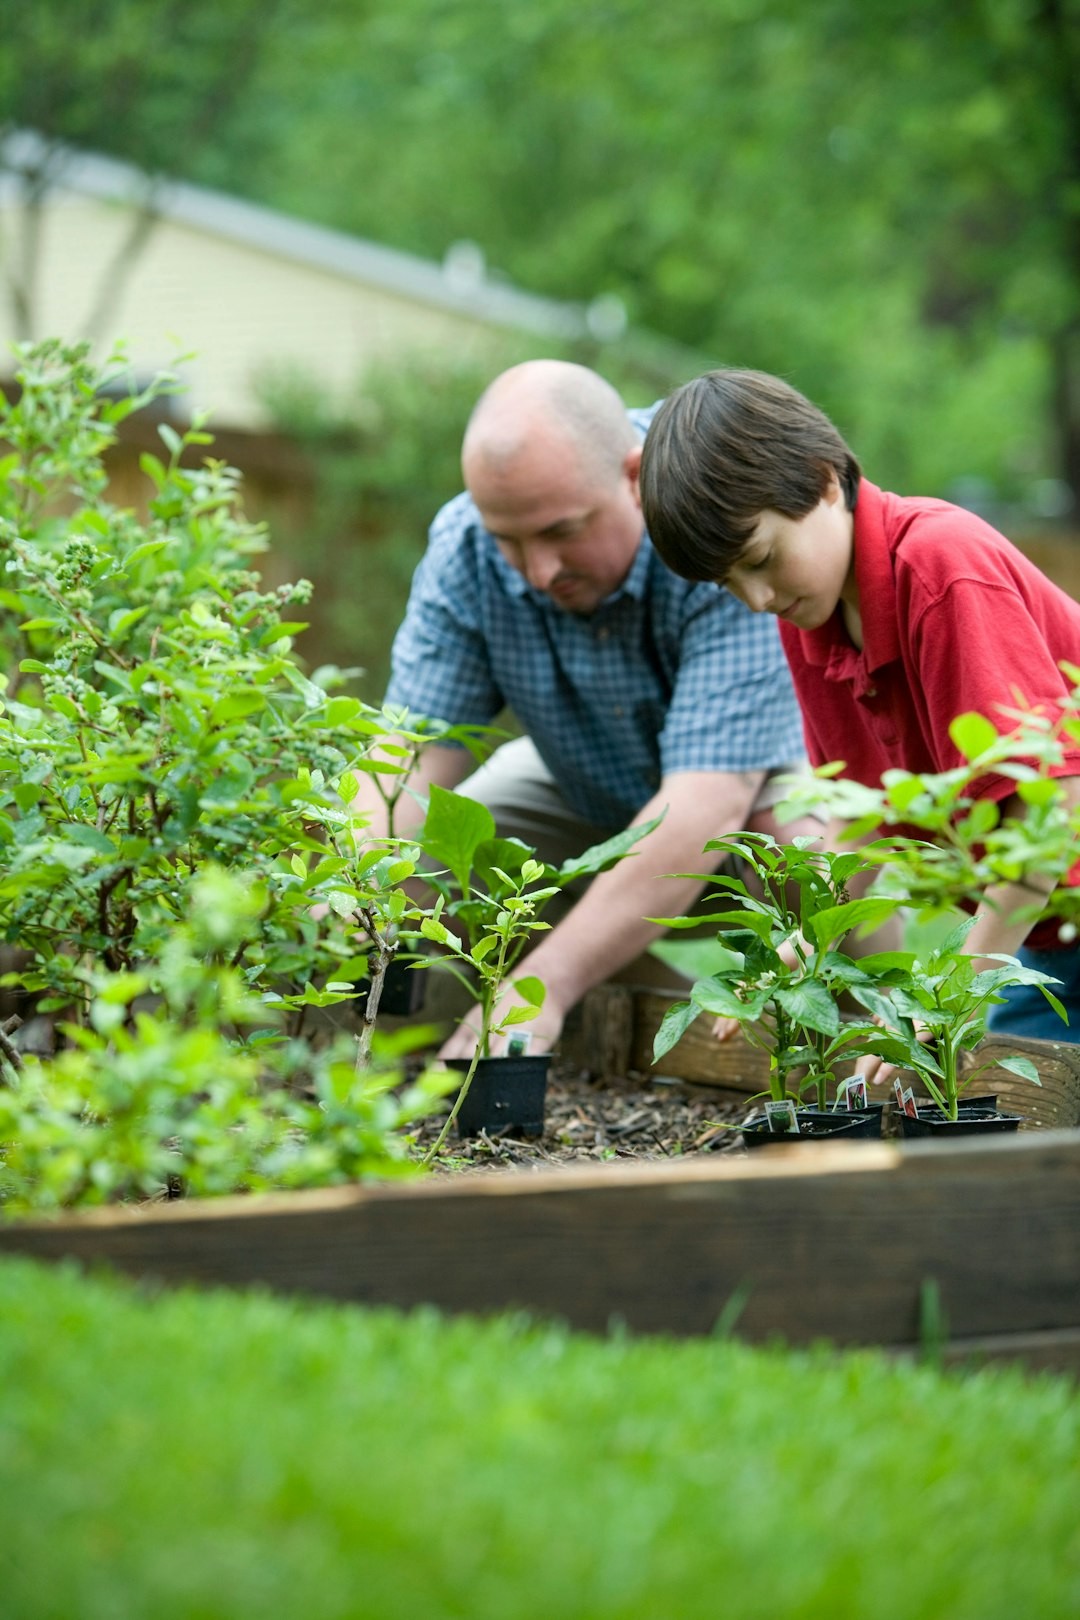 In so many ways, gardening is a very beneficial activity, not only for the environment, but for those who partake in this exercise. This father and son were thoroughly enjoying the fresh outdoor air, as they were planting what appeared to be vegetables in their raised-bed home garden.